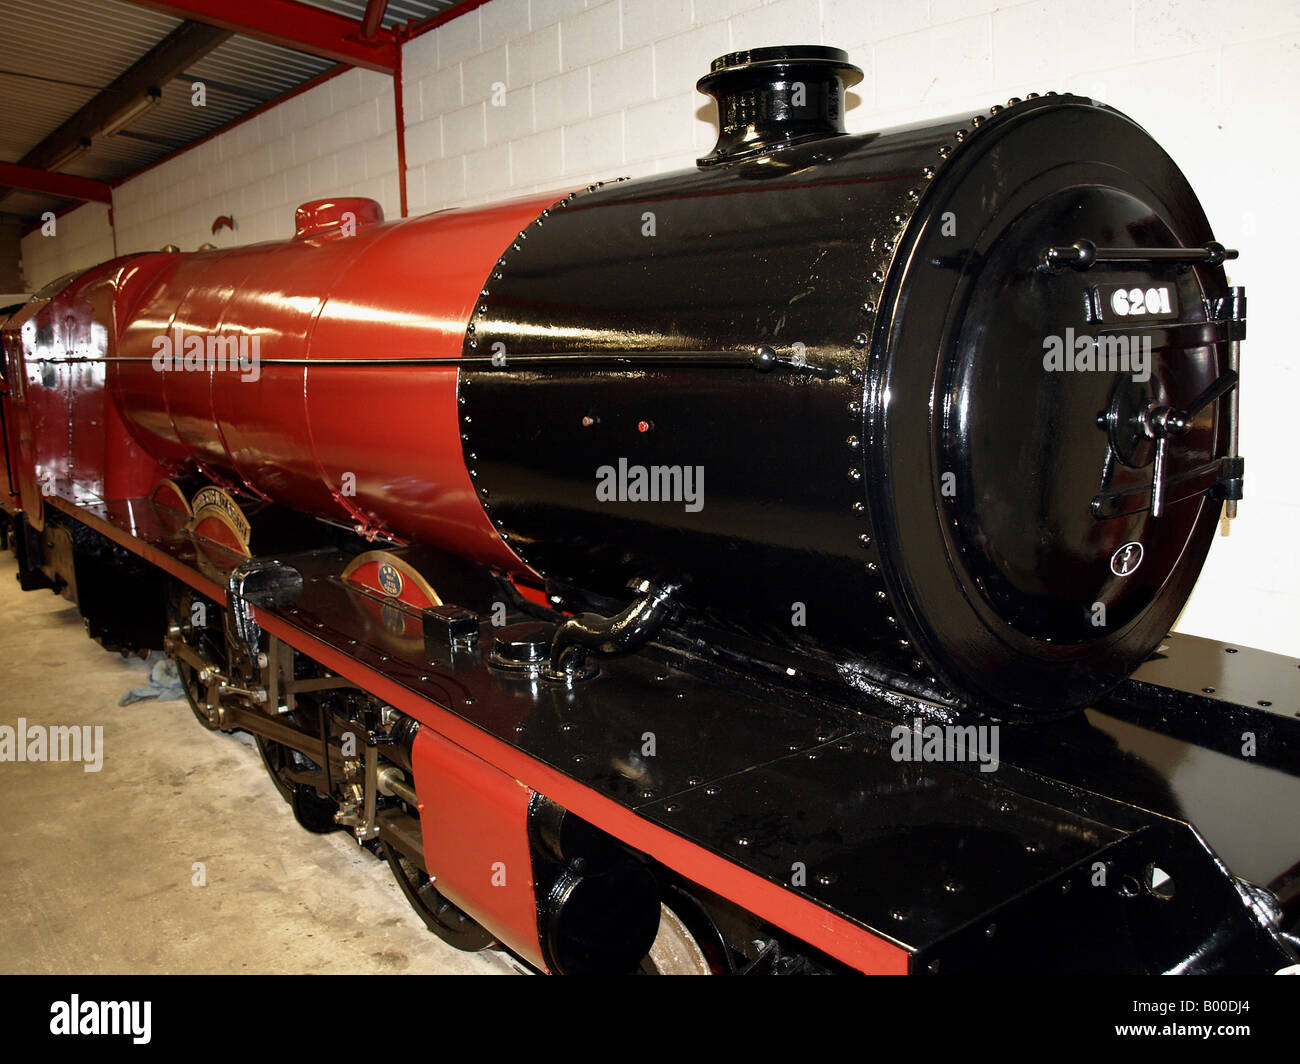 the 'princess elizabeth '21inch gauge steam locomotive,2/5th scale of the full size engine. Stock Photo